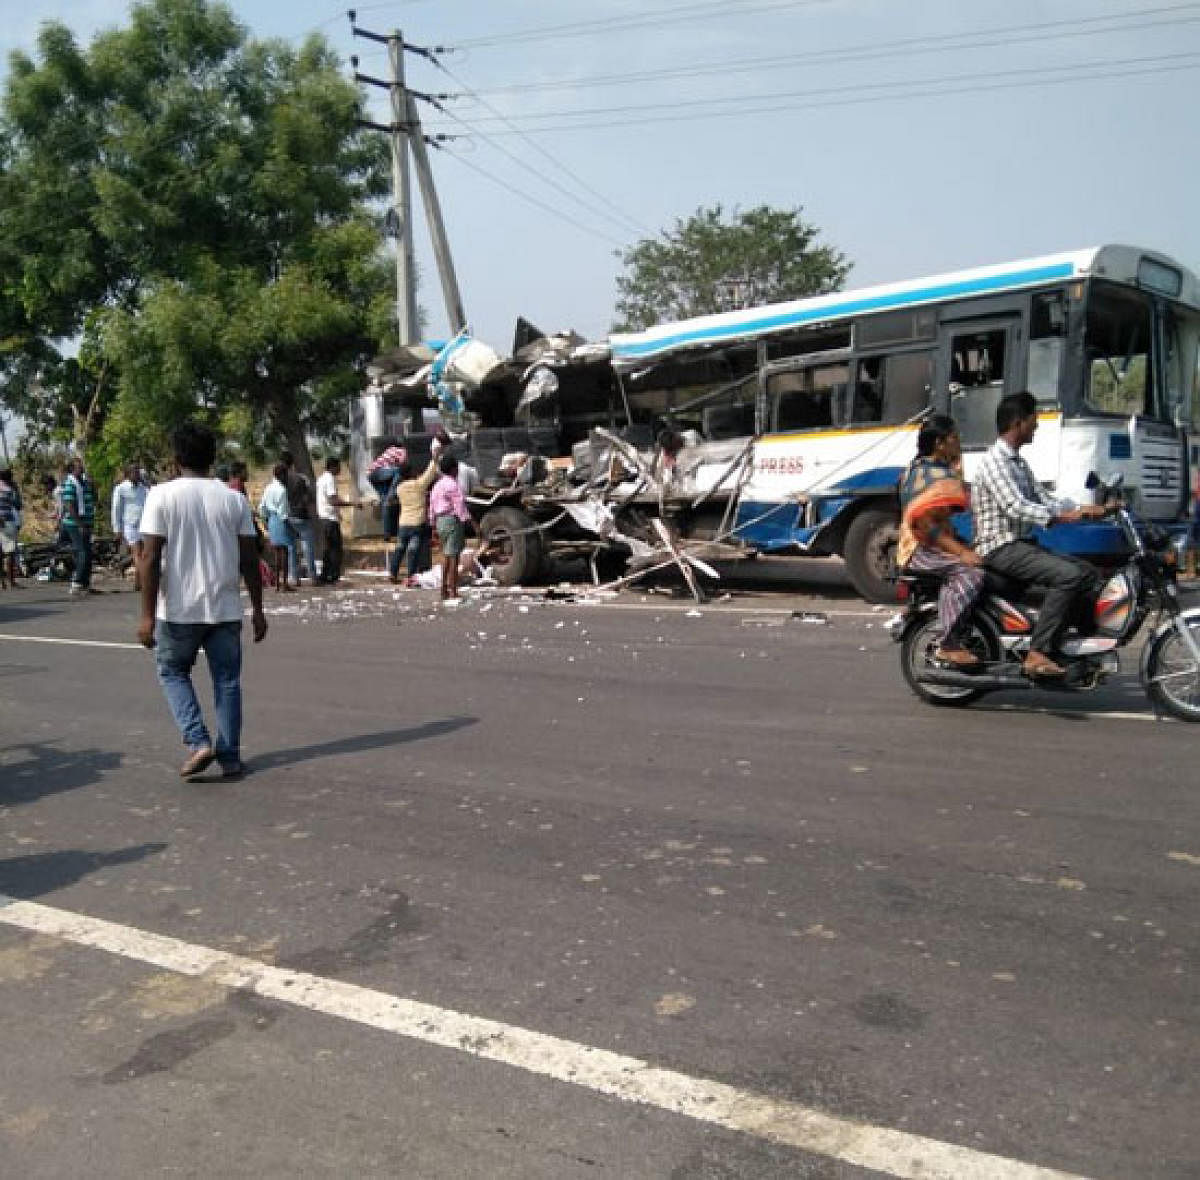 The mangled remains of the ill-fated TSRTC bus, near Karimnagar on Tuesday.